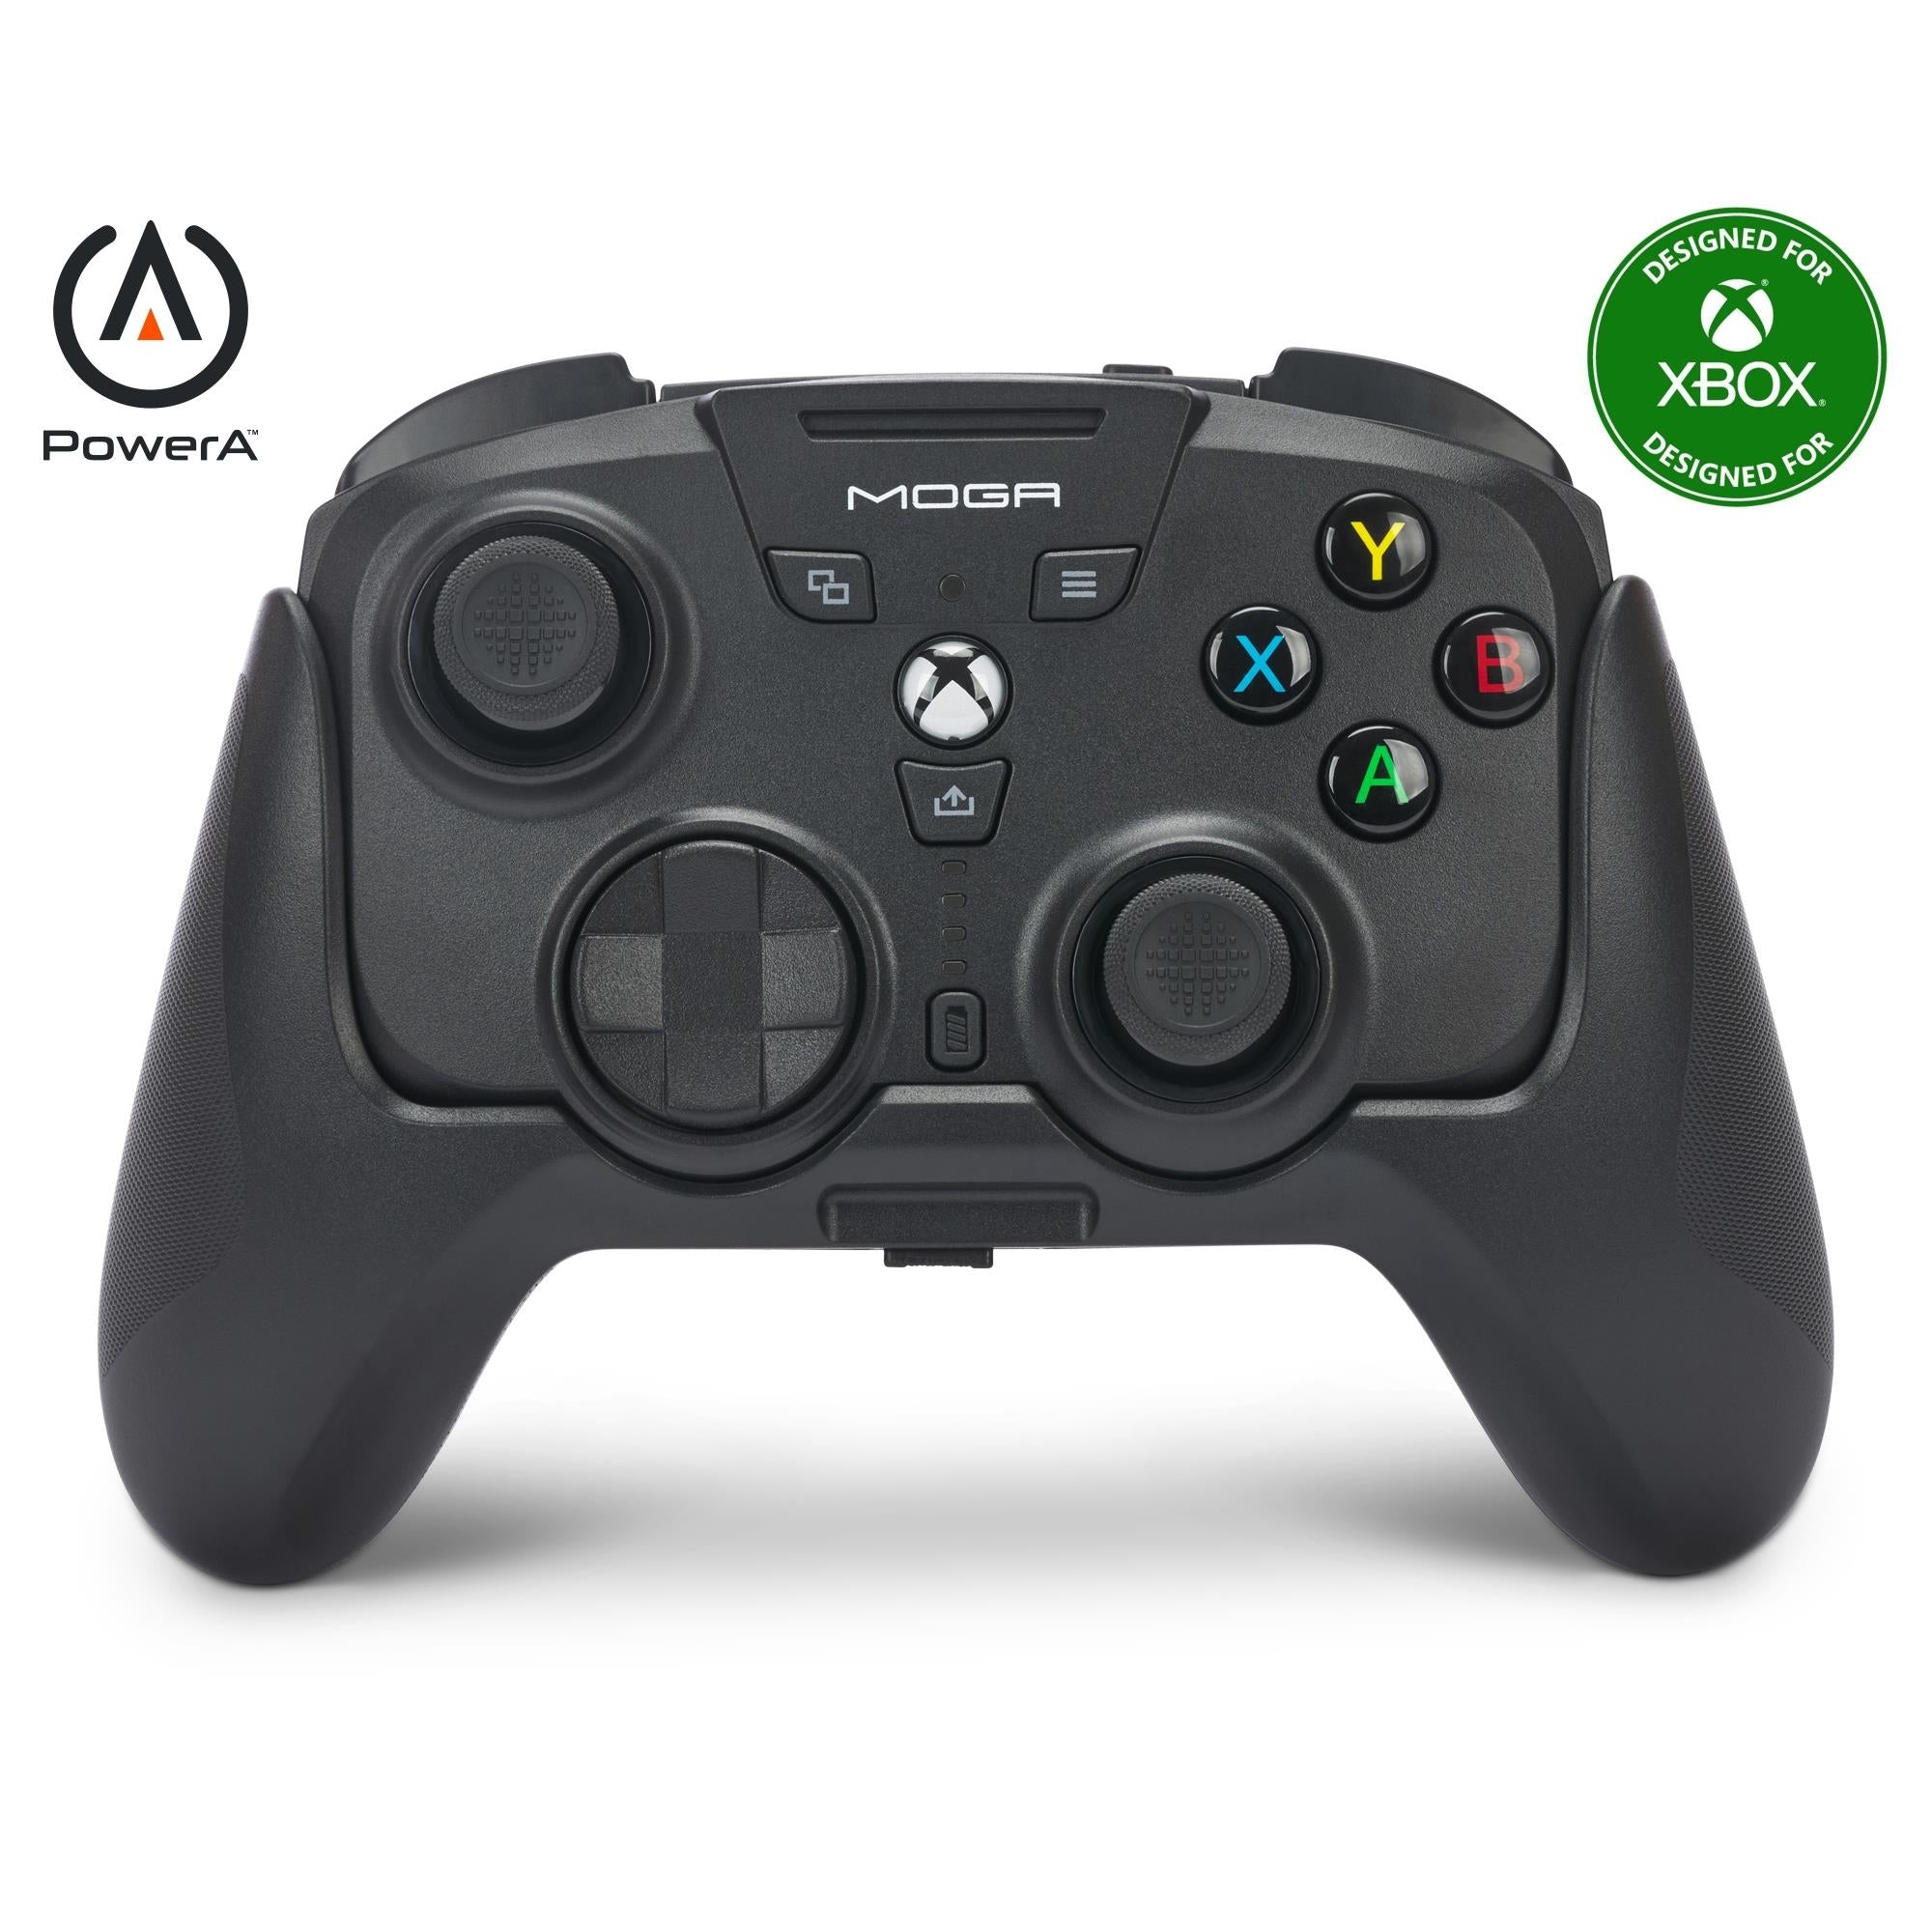 powera moga xp-ultra multi-platform wireless controller for mobile, pc and xbox series x|s